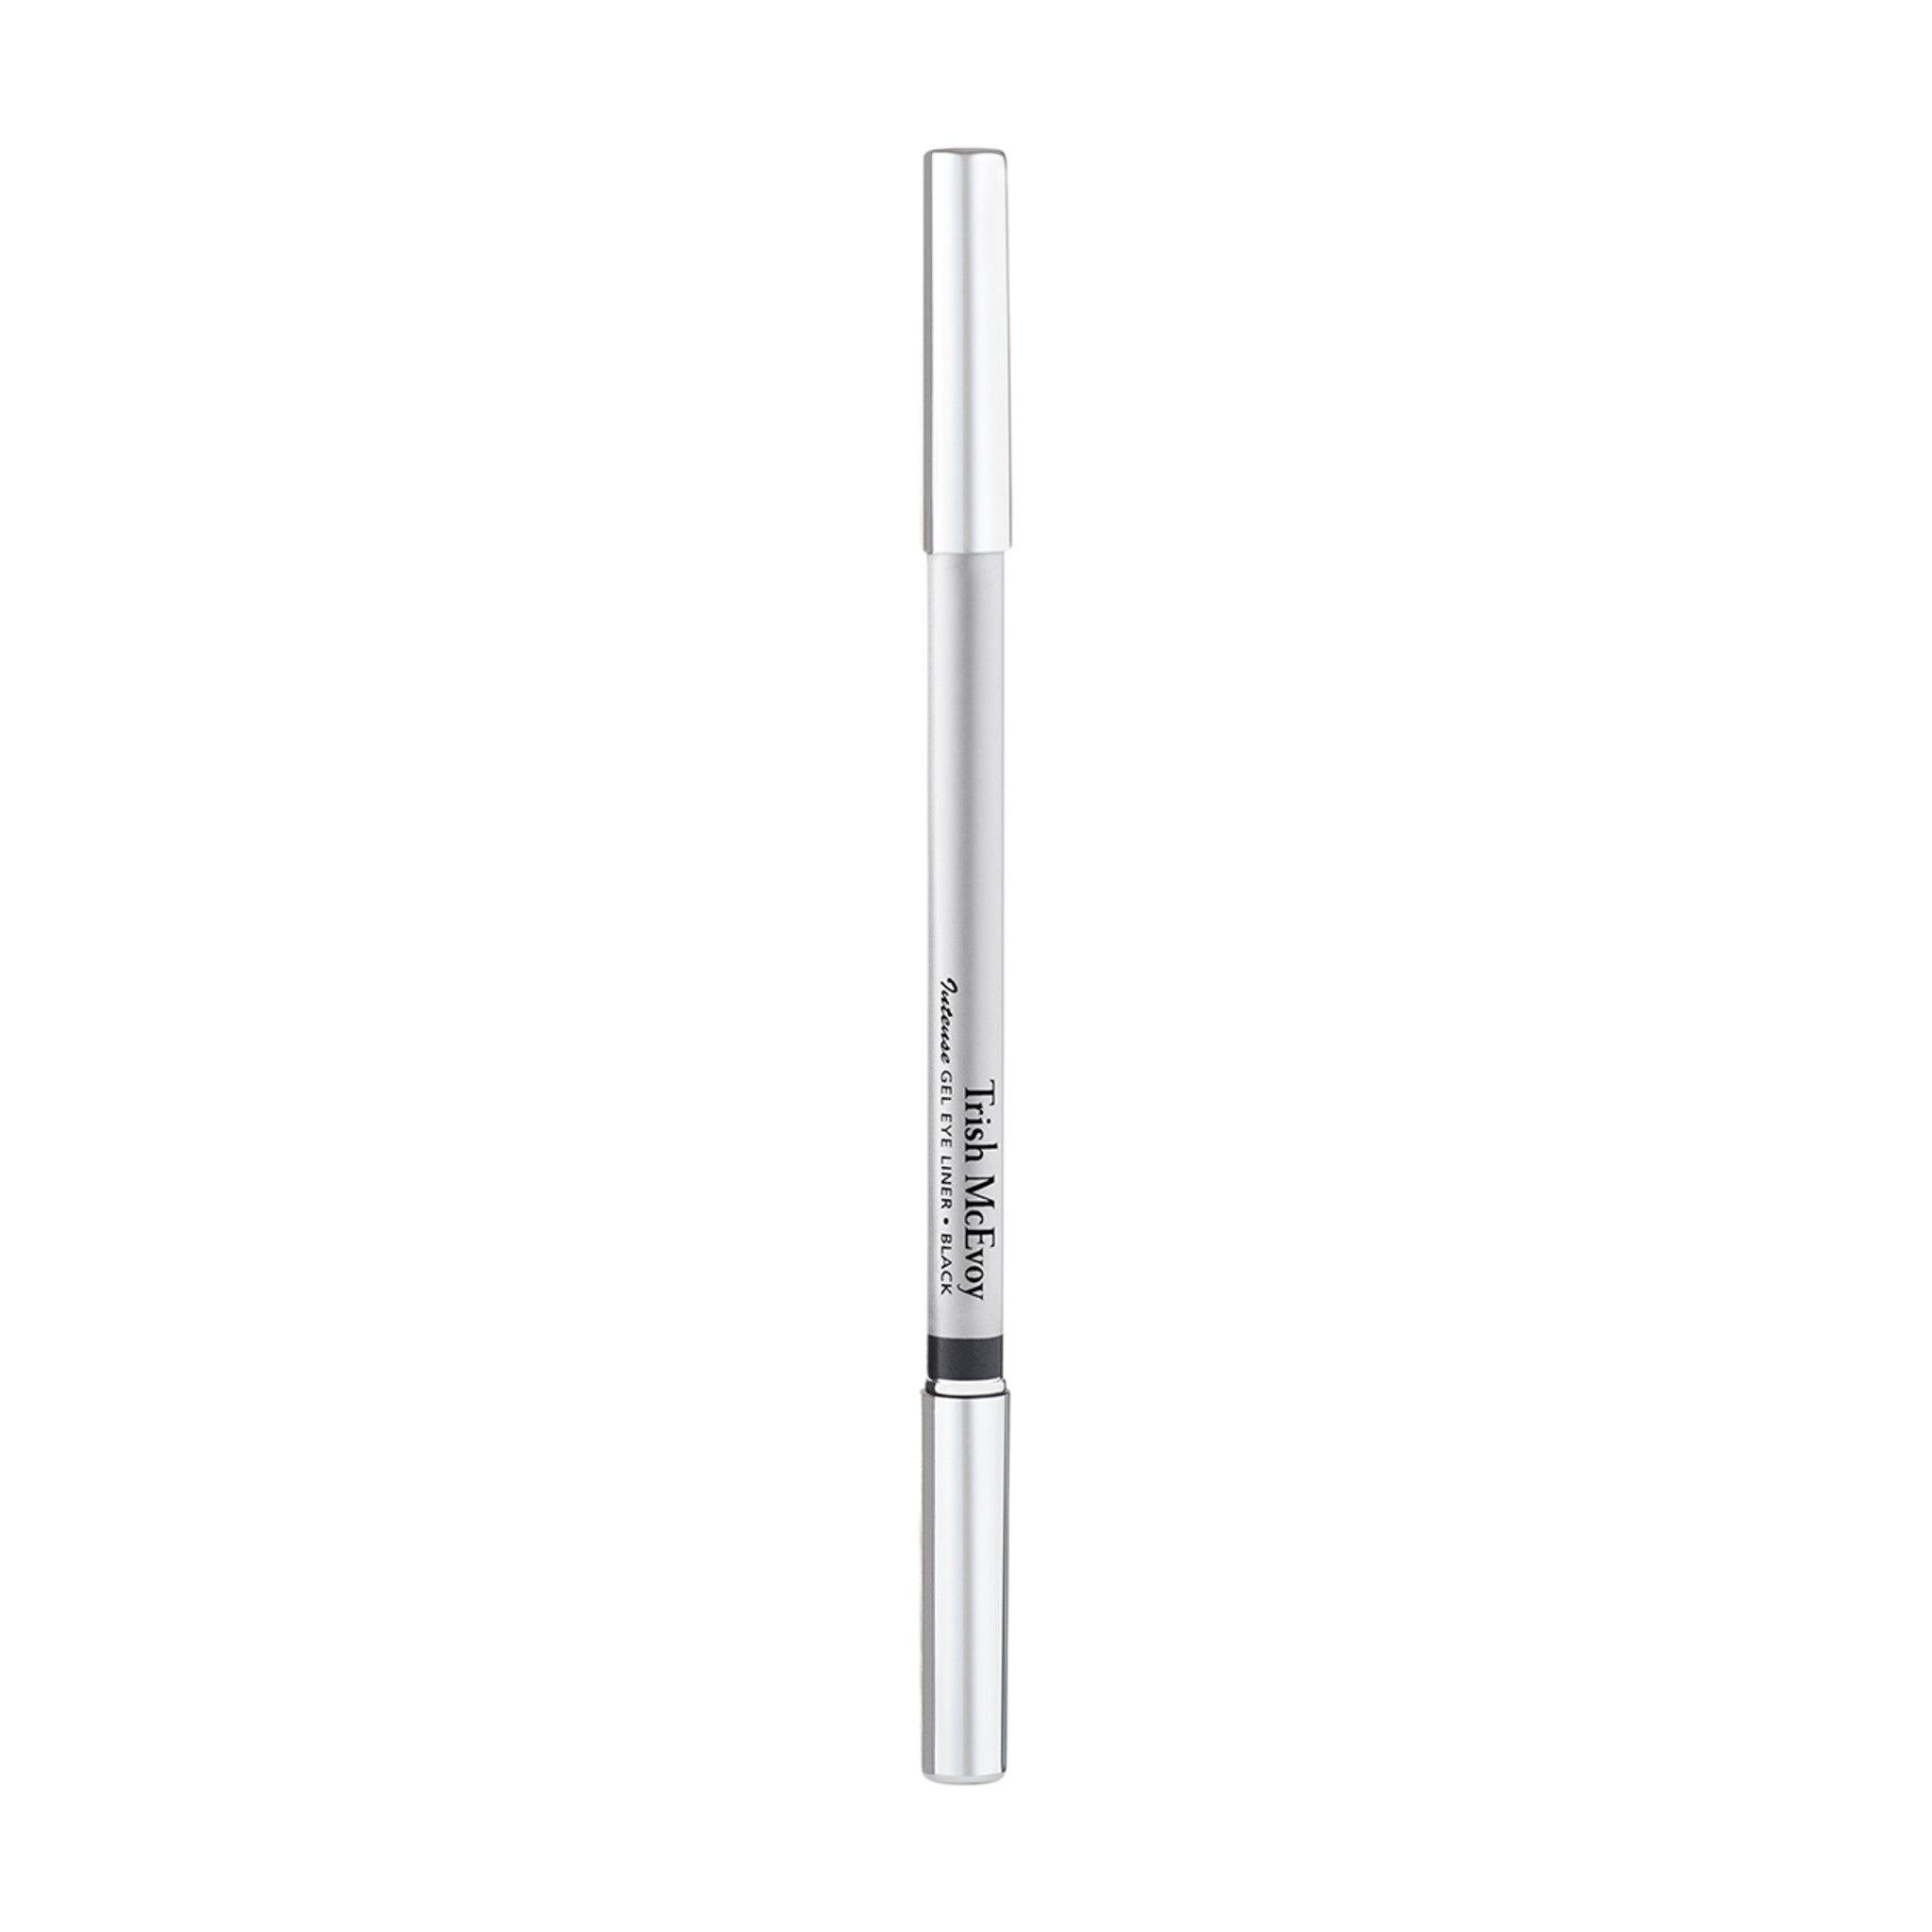 Trish McEvoy Intense Gel Eye Liner Color/Shade variant: Black main image. This product is in the color black